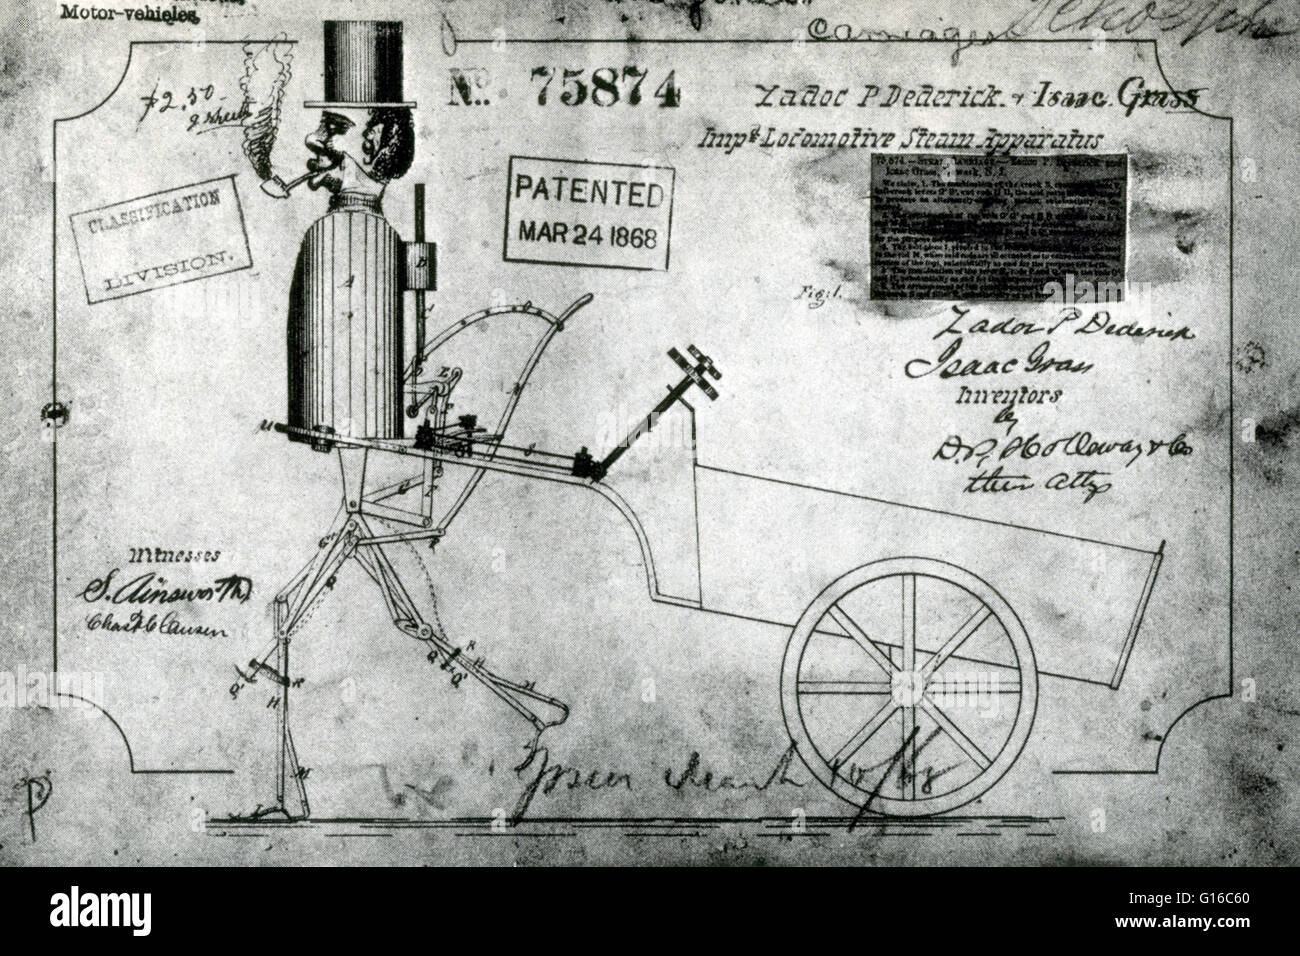 During the 19th century American inventors sought patents on self-propelled road machines. This steam-driven mechanical contraption was conceived by Zadoc Dederick and Isaac Grass from Newark, New Jersey, who said, 'the pivots, cranks and connecting rods Stock Photo